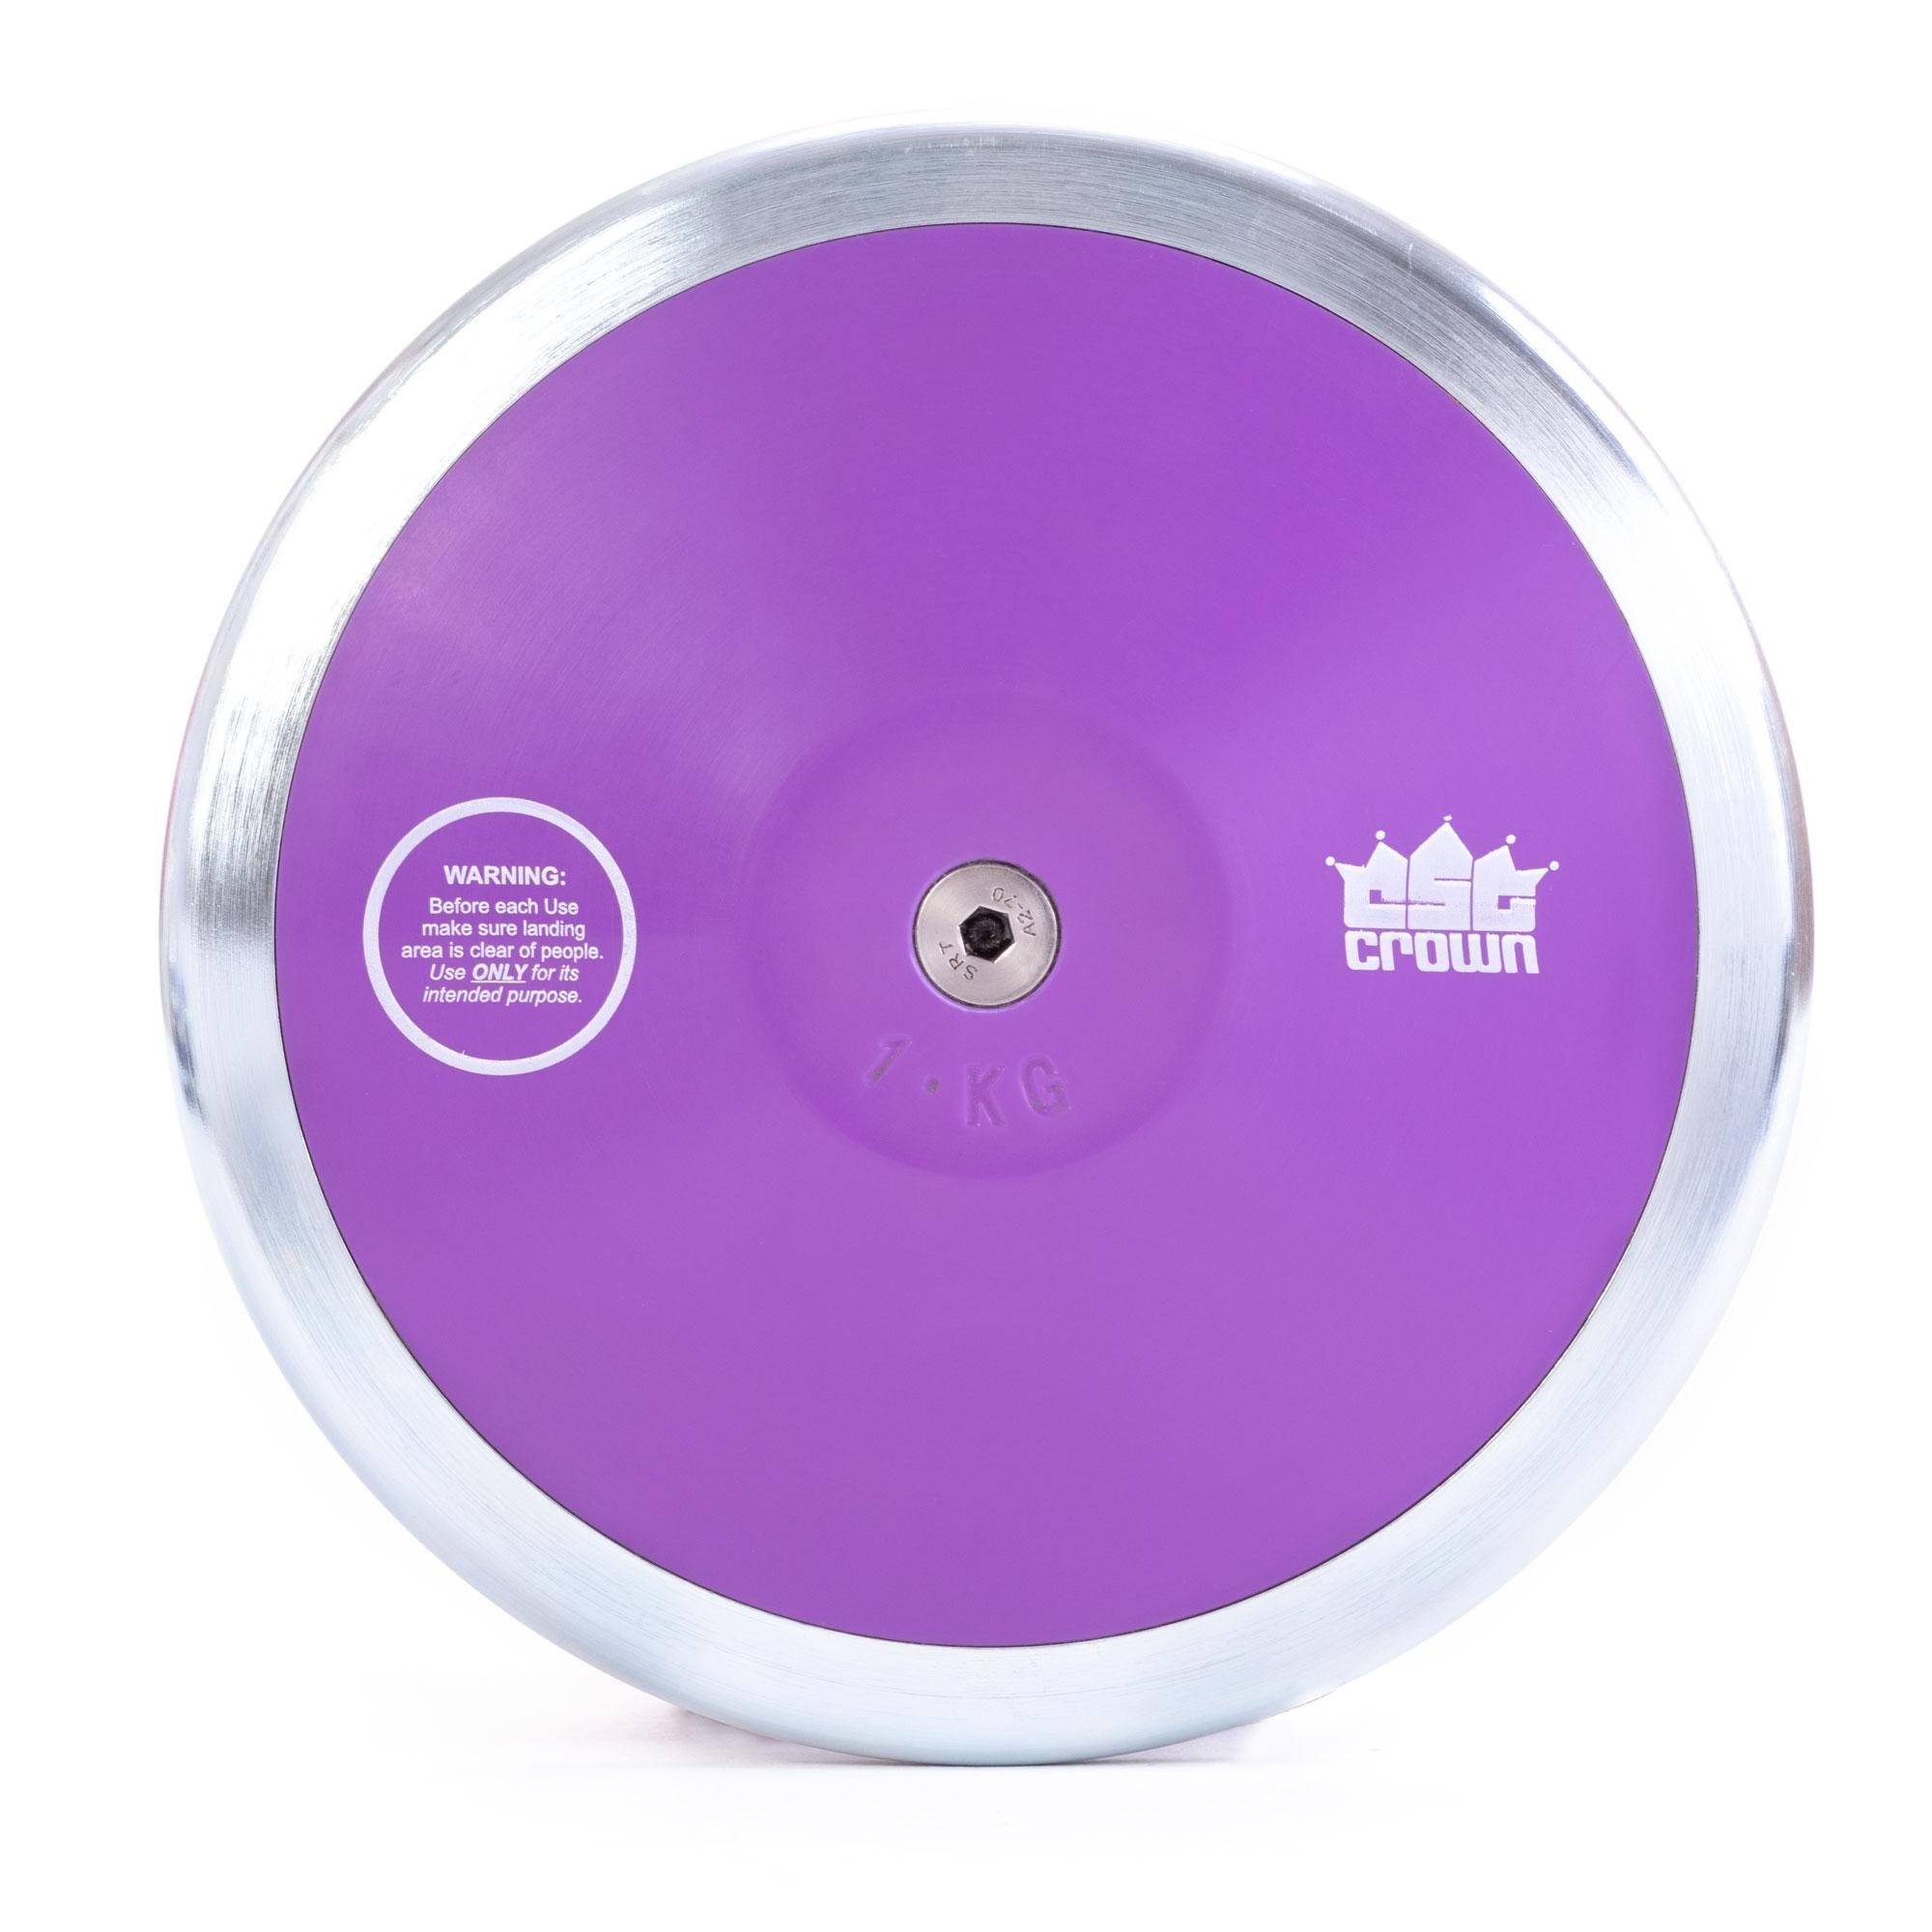 1KG - High Spin Discus - 80% Rim Weight